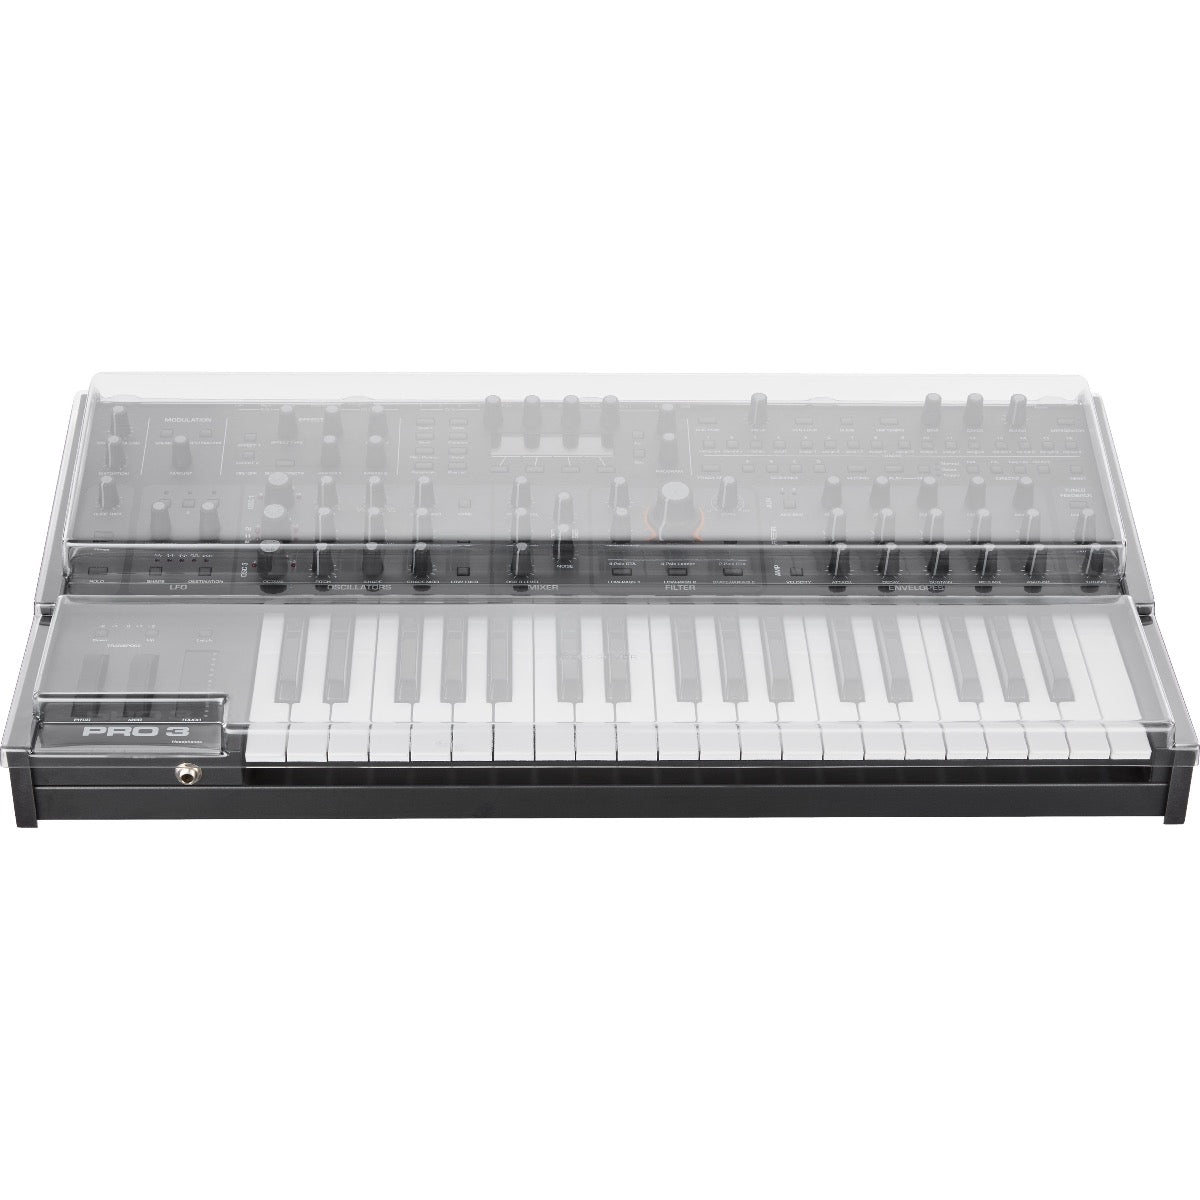 Perspective view of Decksaver Sequential Pro 3 Cover fitted onto Sequential Pro 3 (sold separately) showing top and front